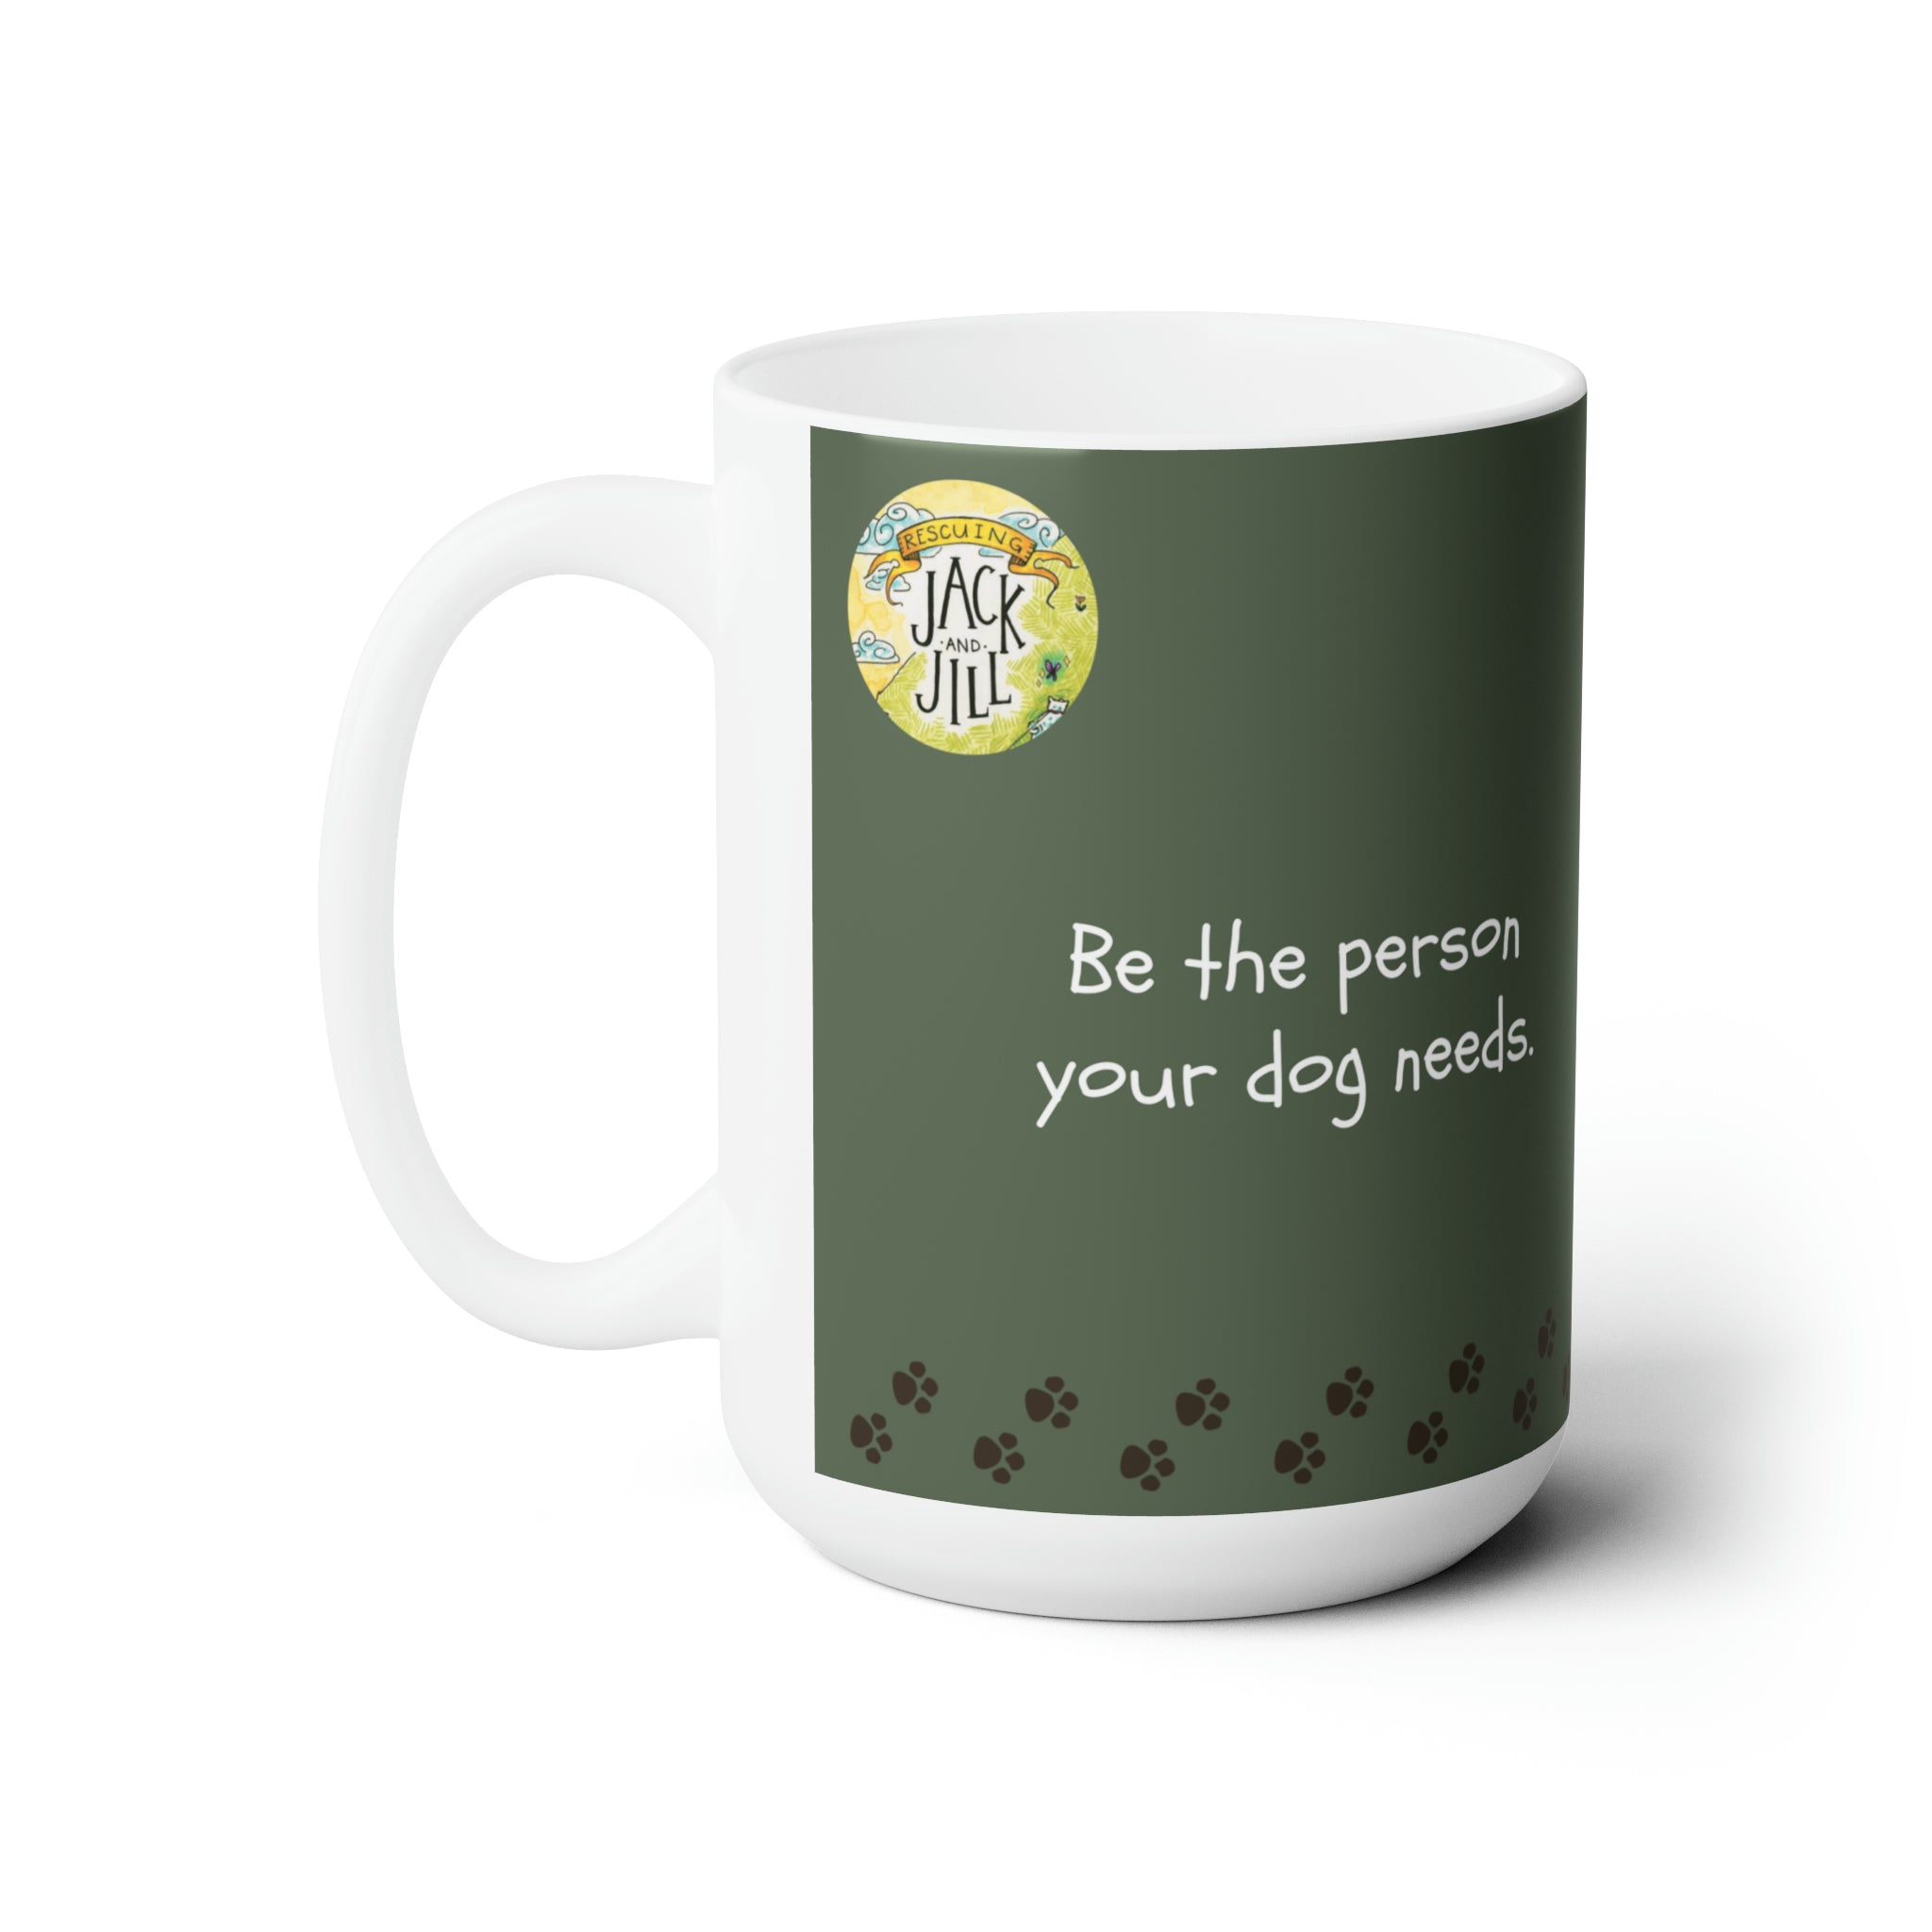 &quot;Be the person your dog needs.&quot;